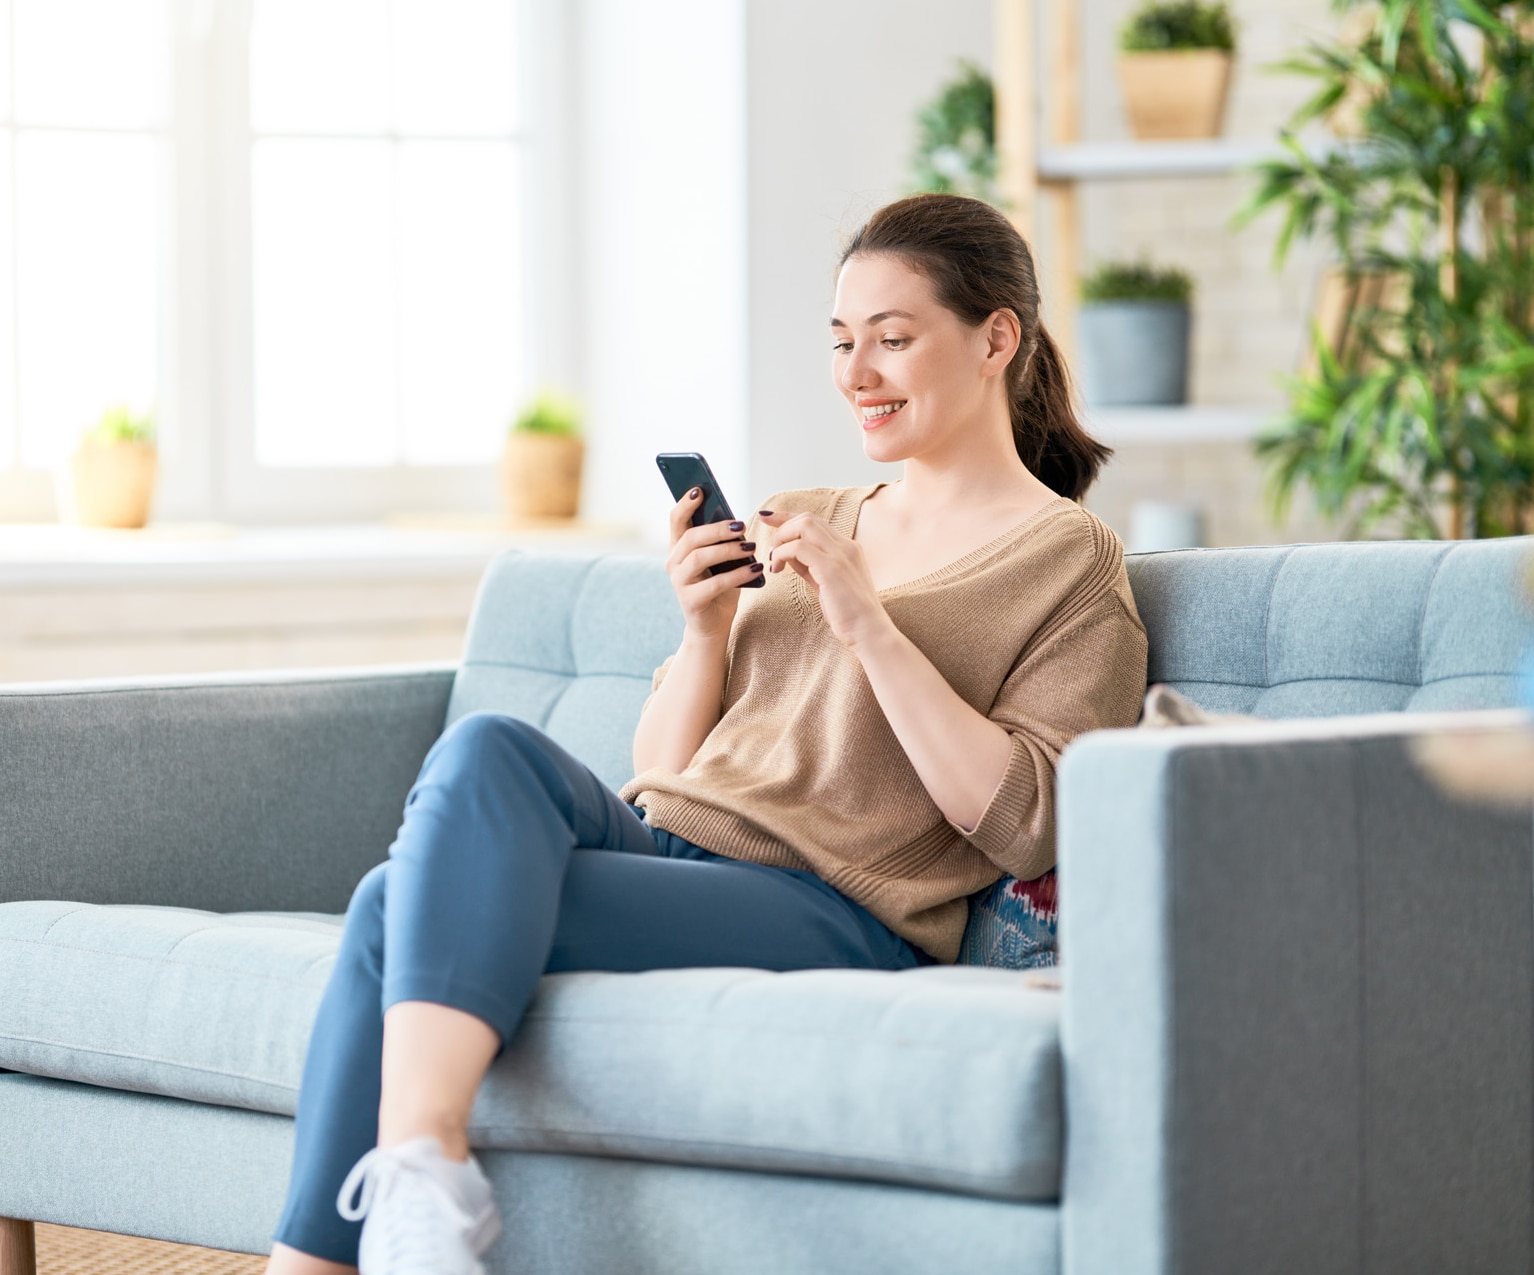 Happy casual beautiful woman is talking on a phone sitting on a sofa at home.; Shutterstock ID 1422270389; purchase_order: -; job: -; client: -; other: -